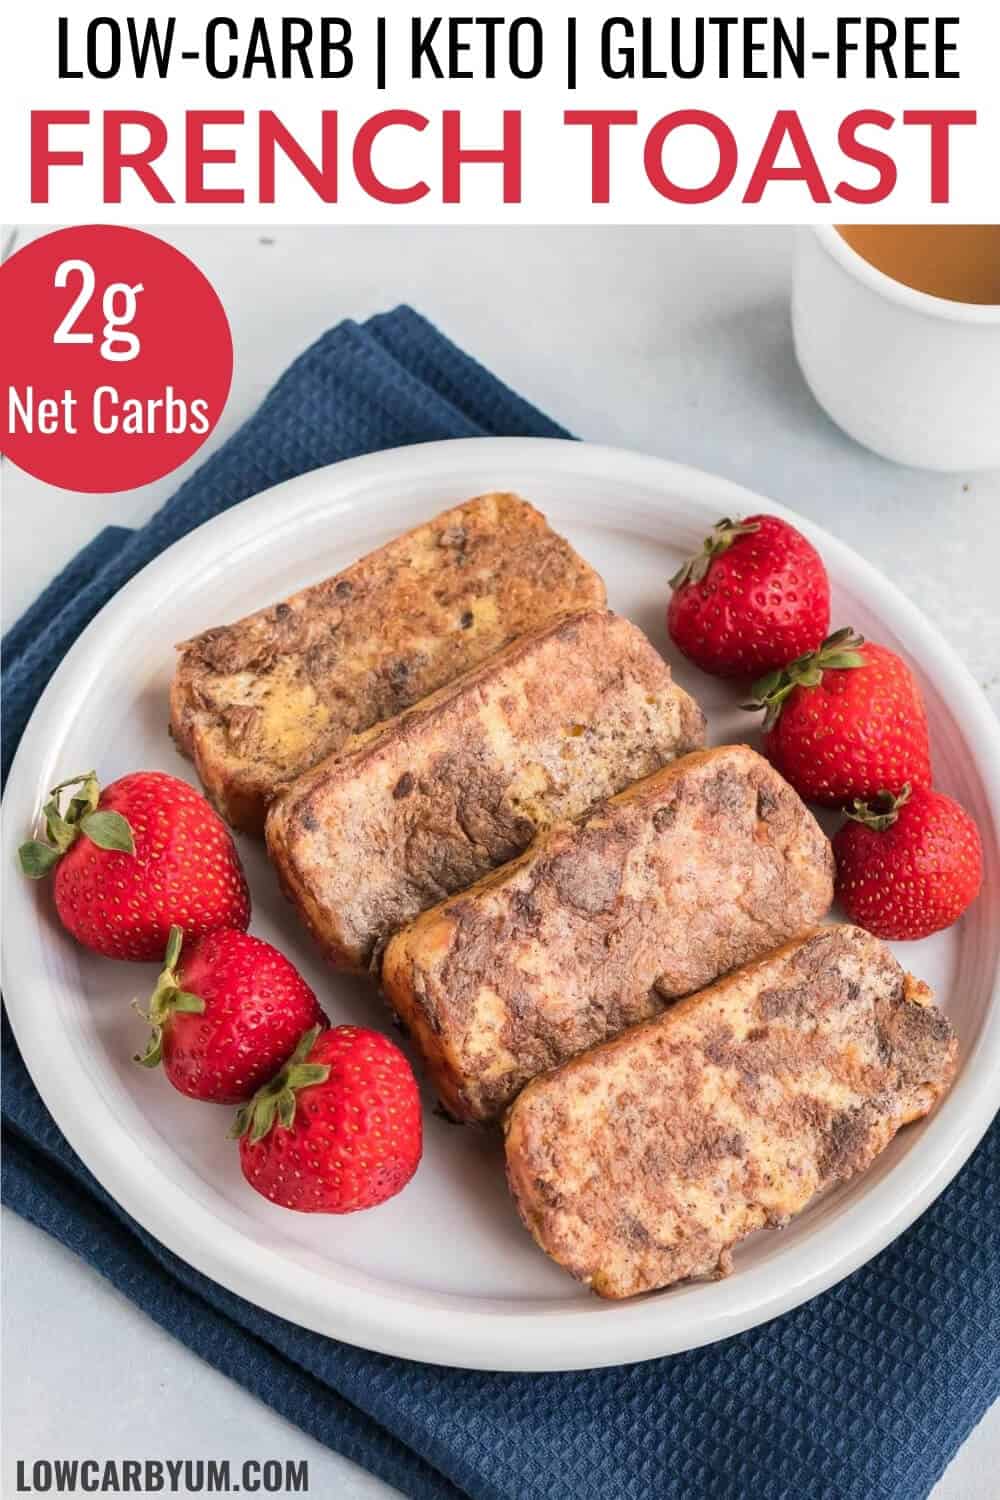 low-carb keto french toast recipe